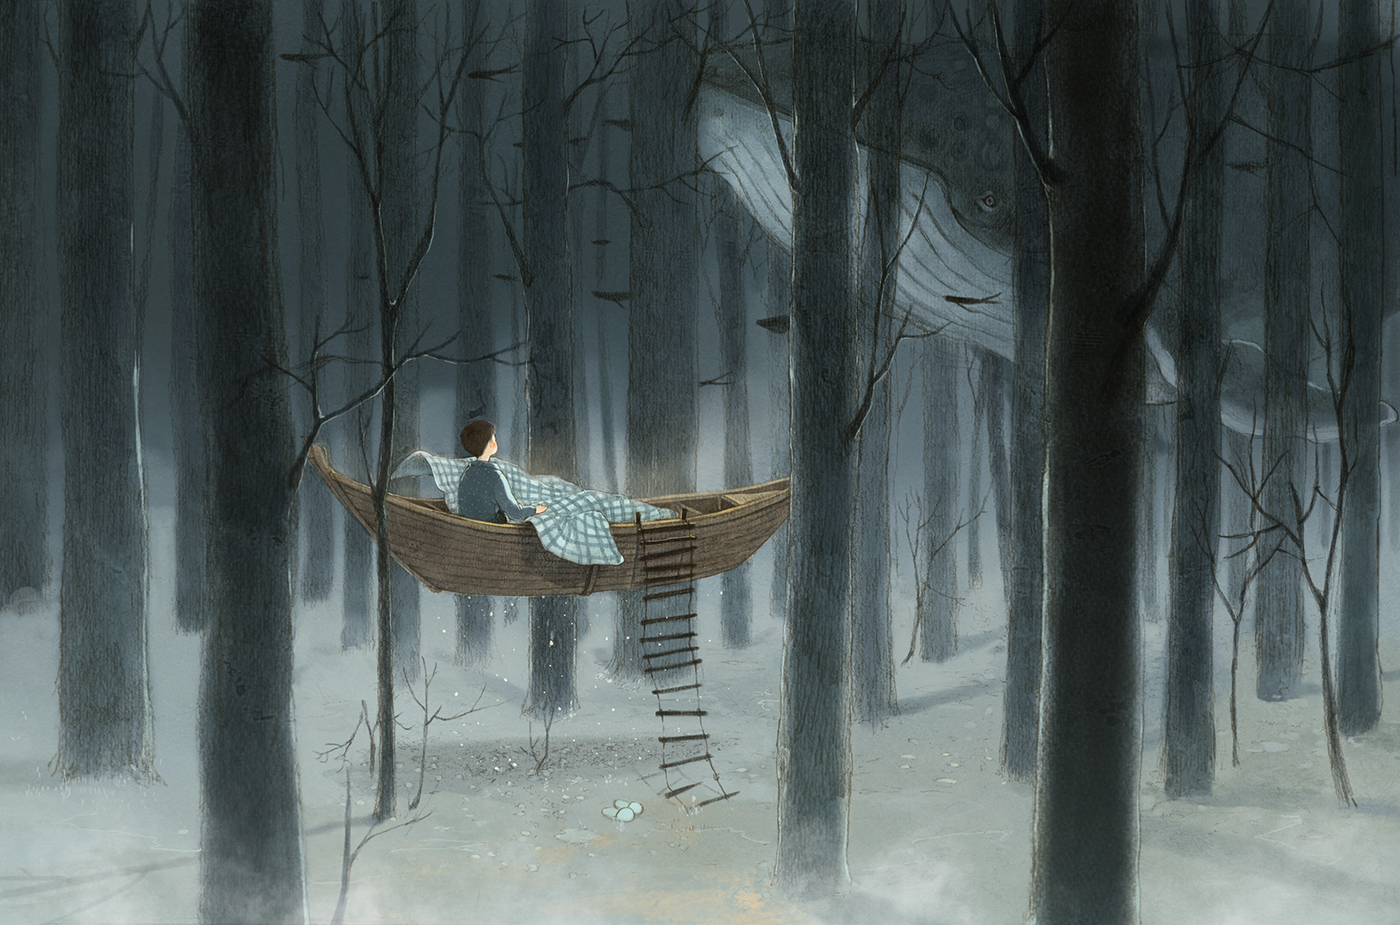 Beautiful Storybook Illustrations of People Communing with Nature by Jin Xingye